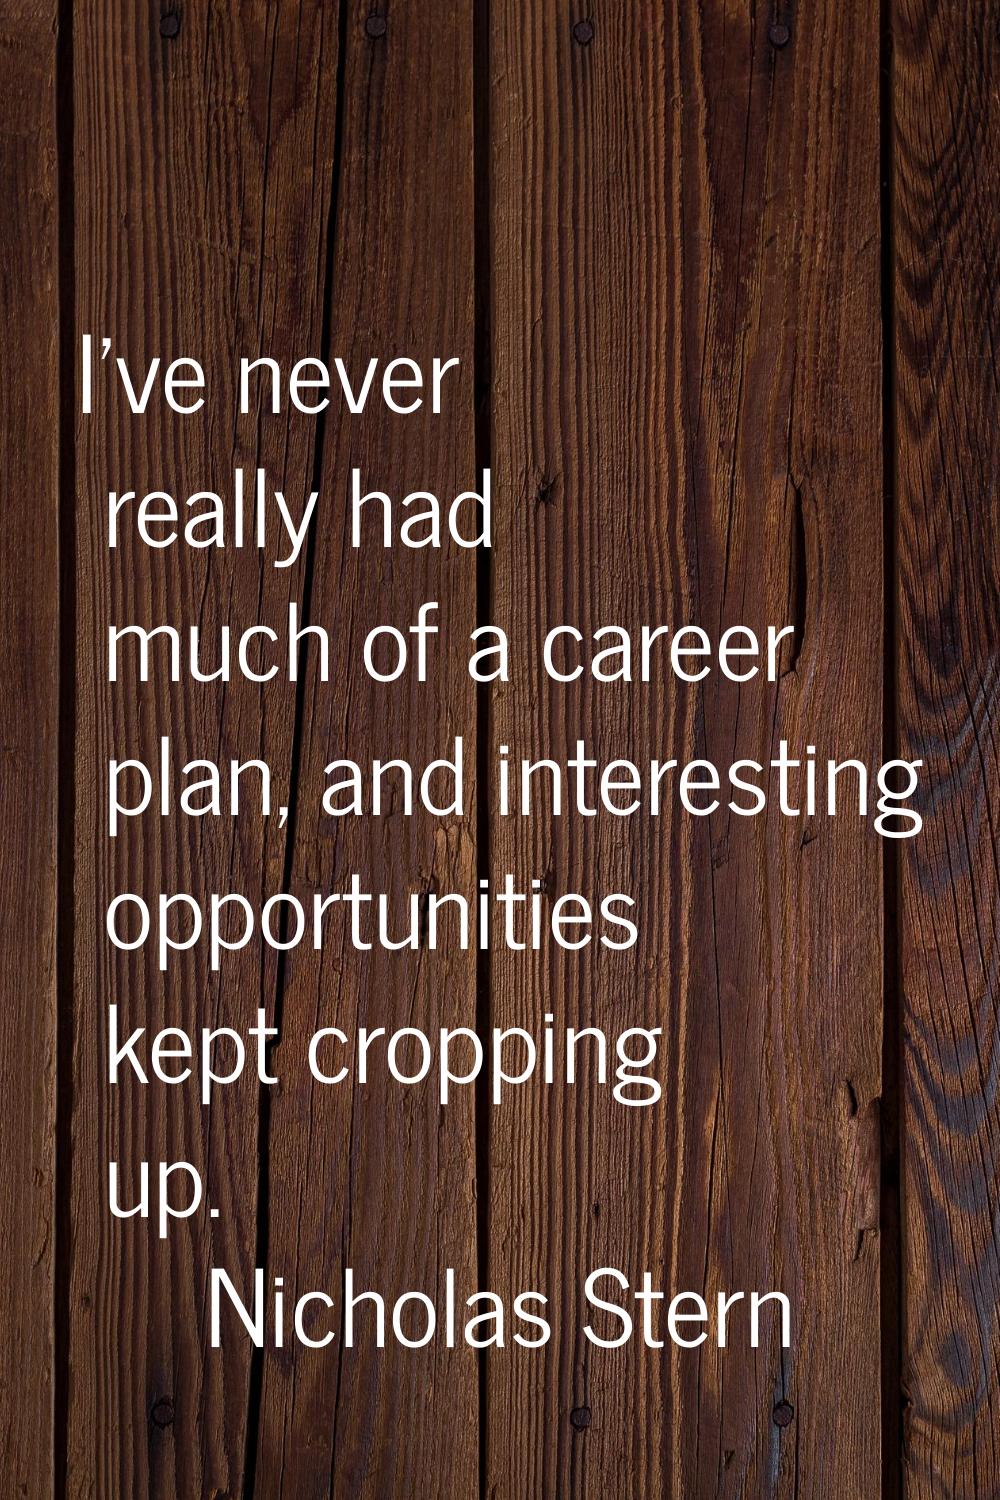 I've never really had much of a career plan, and interesting opportunities kept cropping up.